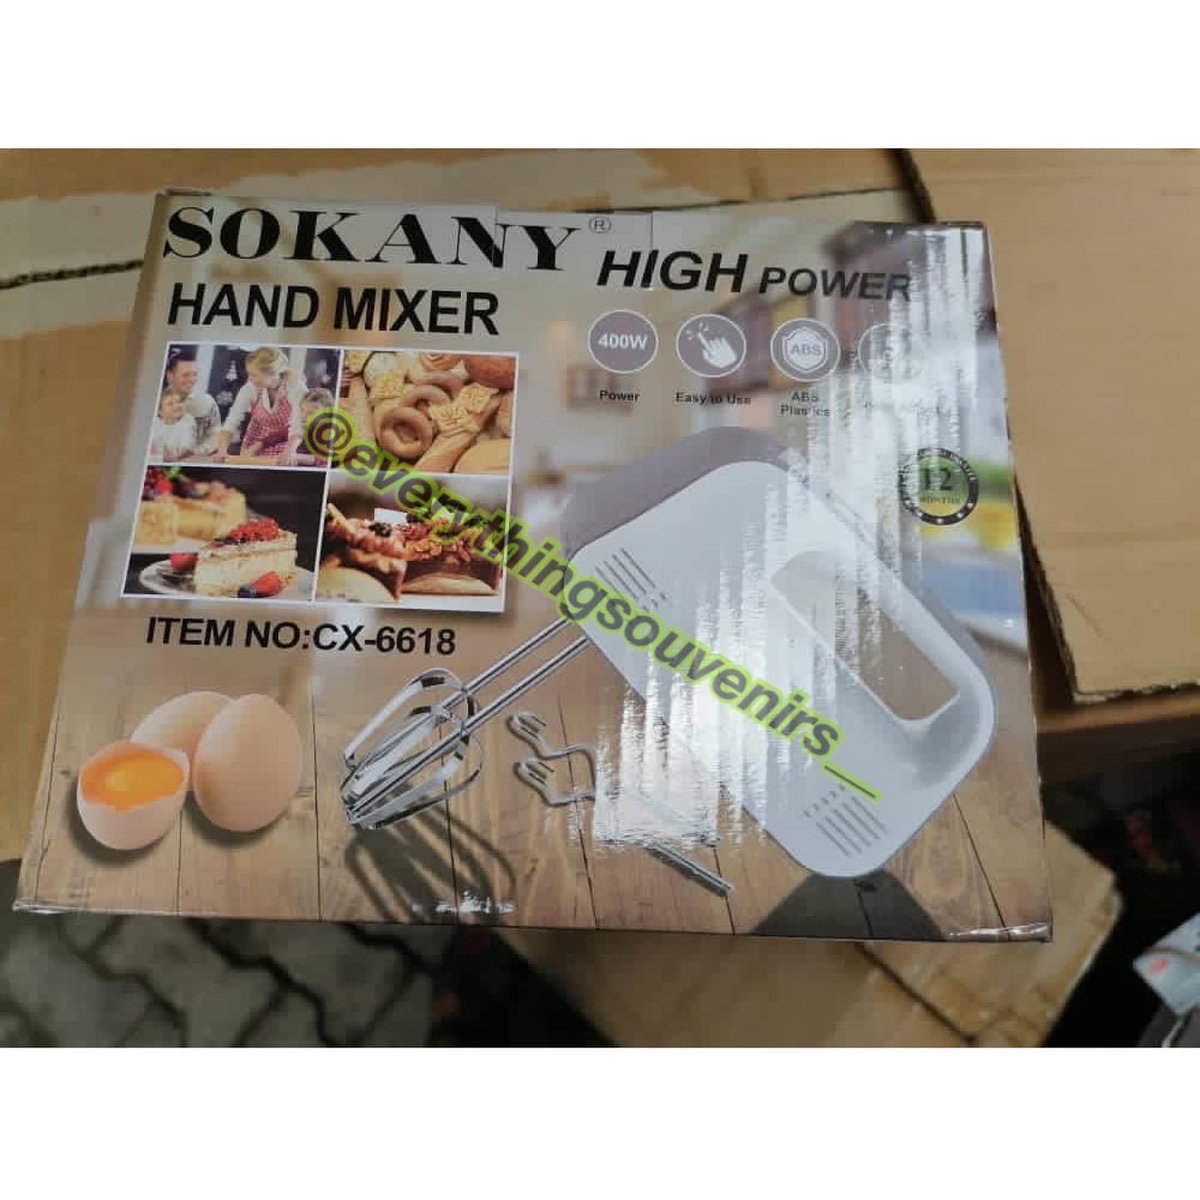 Sokany Hand mixer available Features;7 speed-settings and 180-watt motor:4 stainless steel accessories: Chrome Beater×2, Dough Hook×2.Price- 7500Please RTYou can order through DM or our flutterwave store  https://flutterwave.com/store/everythingsouvenirs